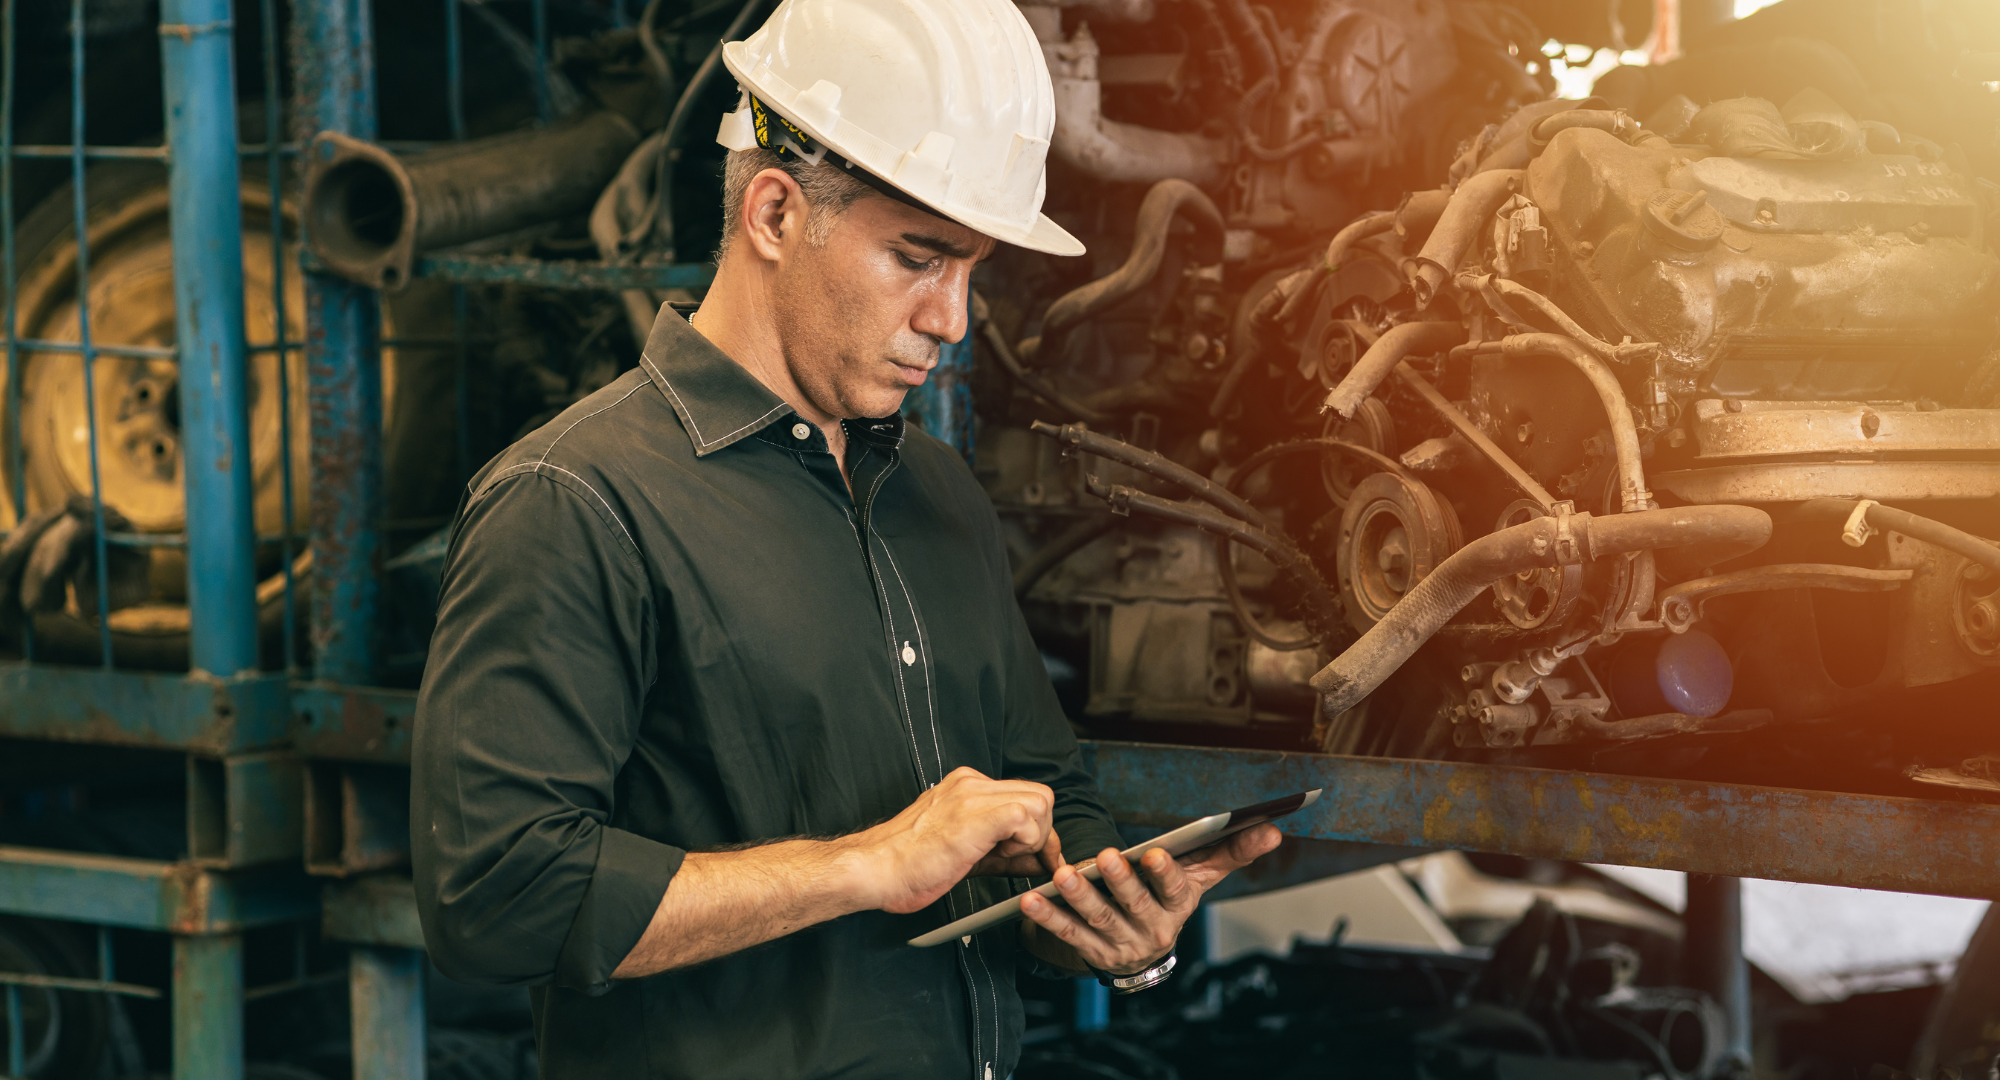 hispanic gentleman with a white hard hat looking contemplating at a tablet on a shop floor with machines behind him